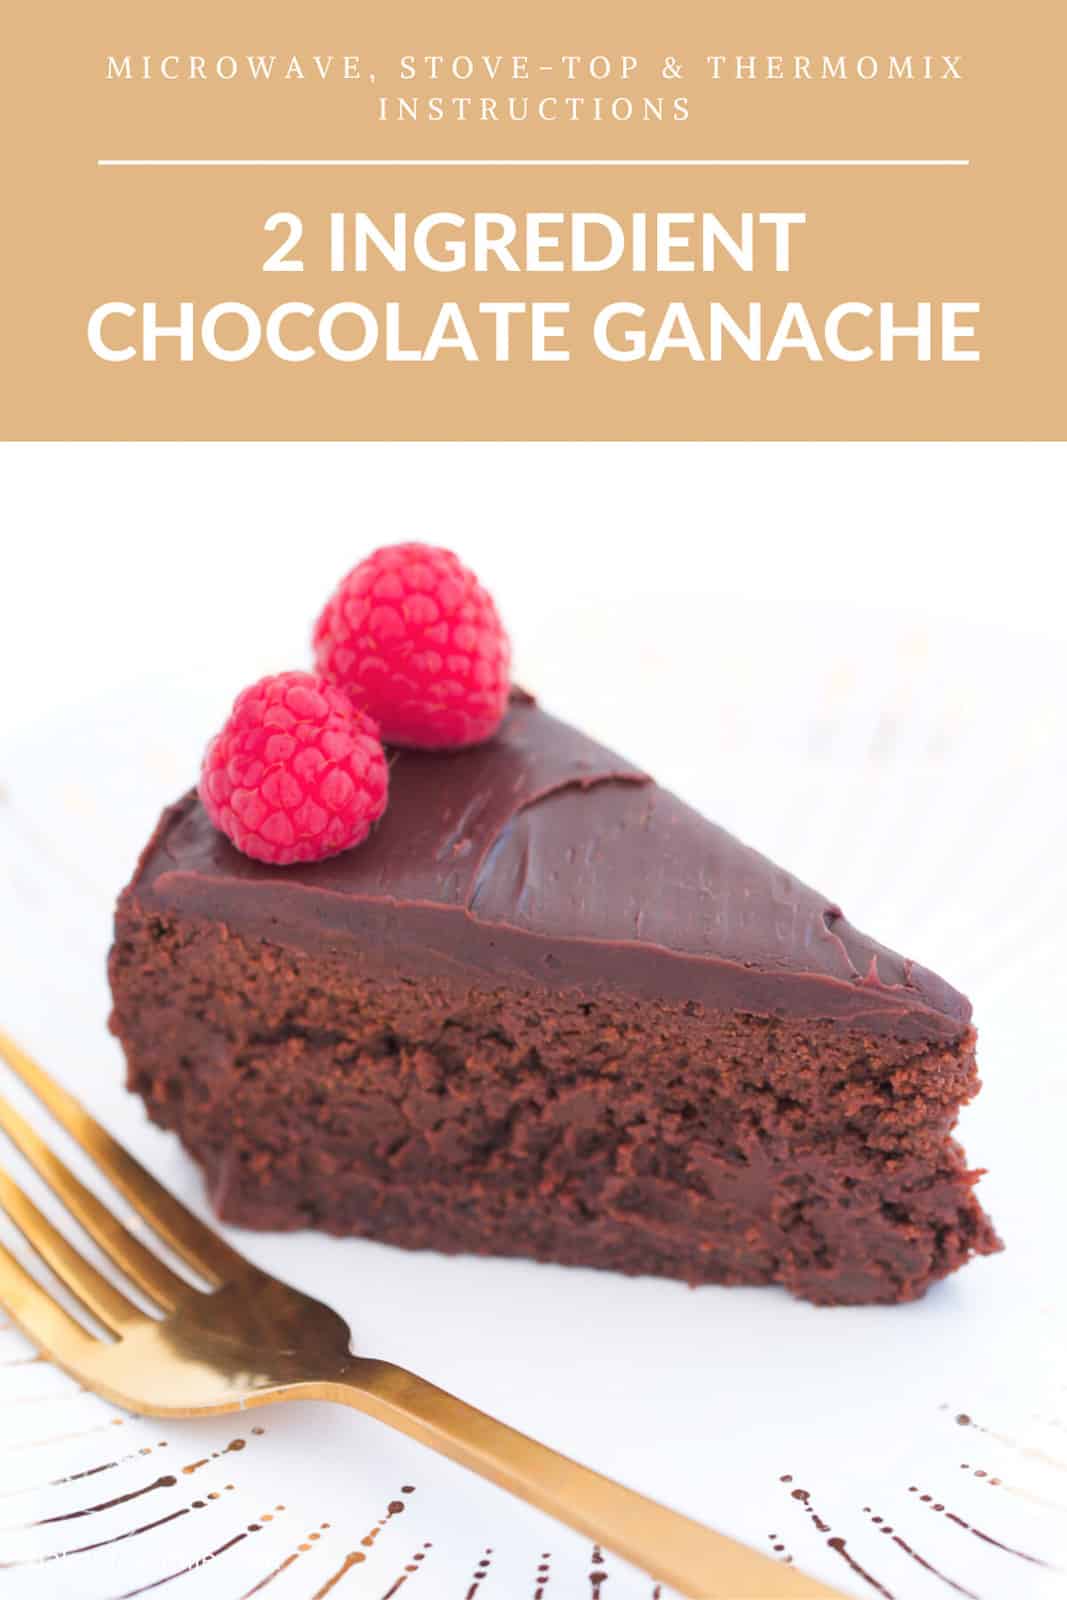 A slice of rich chocolate cake with chocolate ganache and raspberries served with a gold fork.